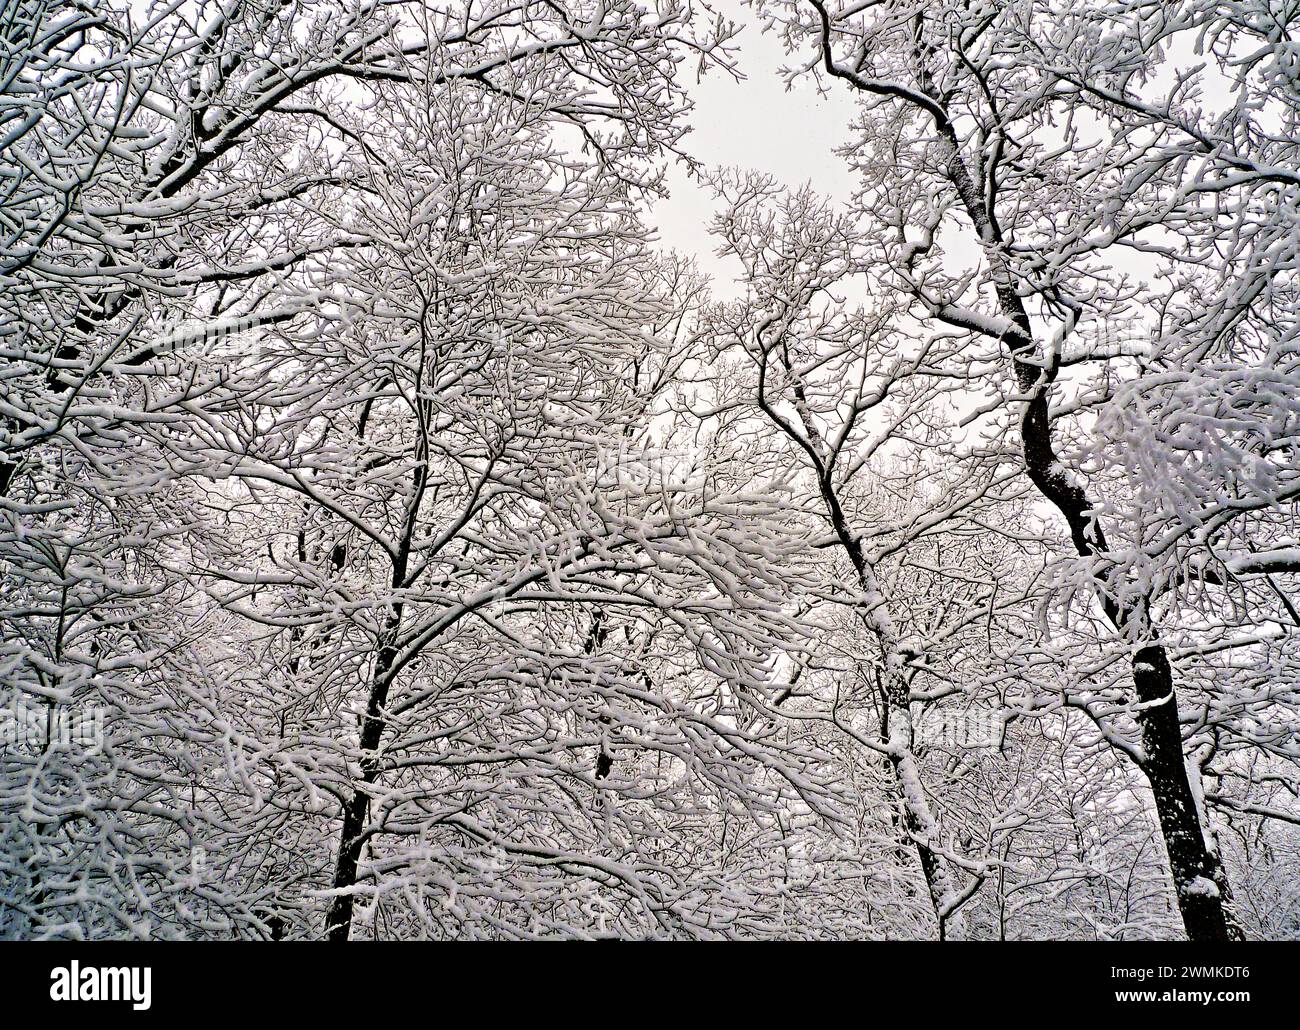 Snow-laden tree branches in a forest under an overcast sky; United States of America Stock Photo